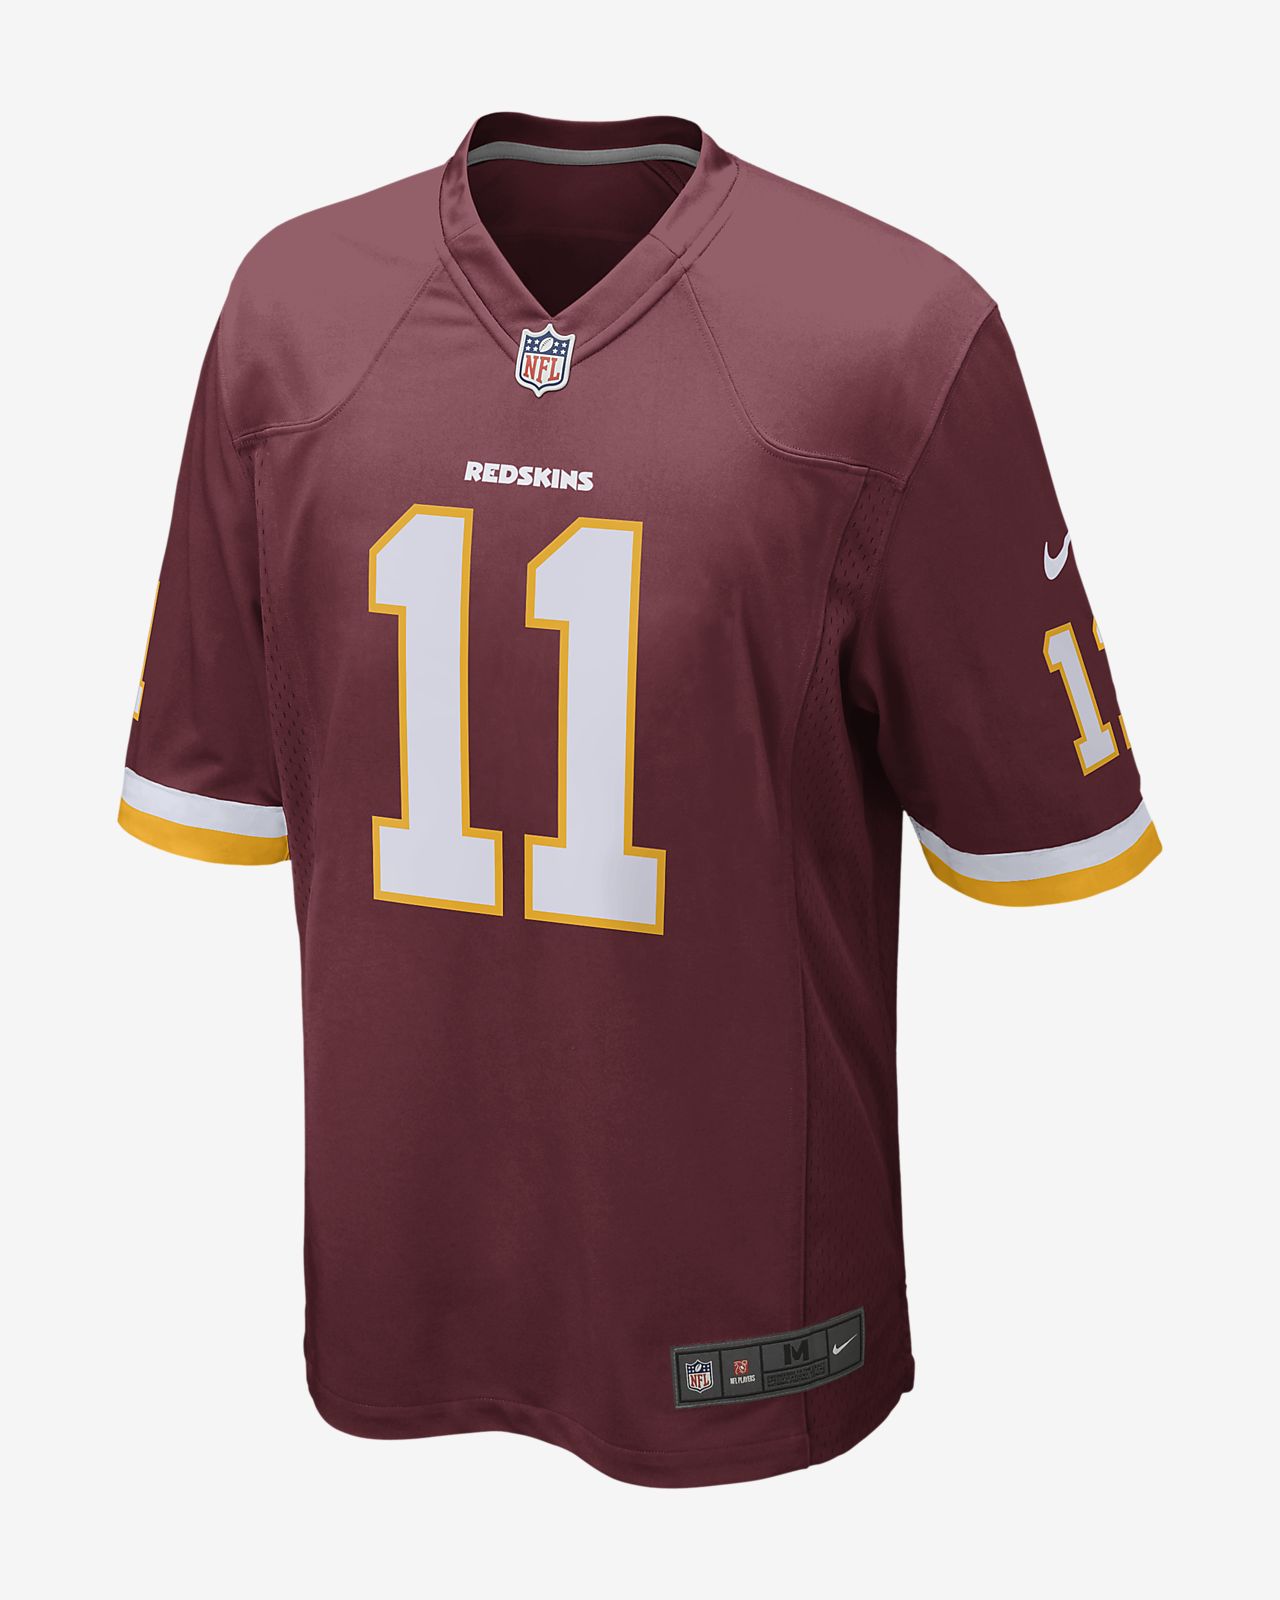 where can i buy a redskins jersey